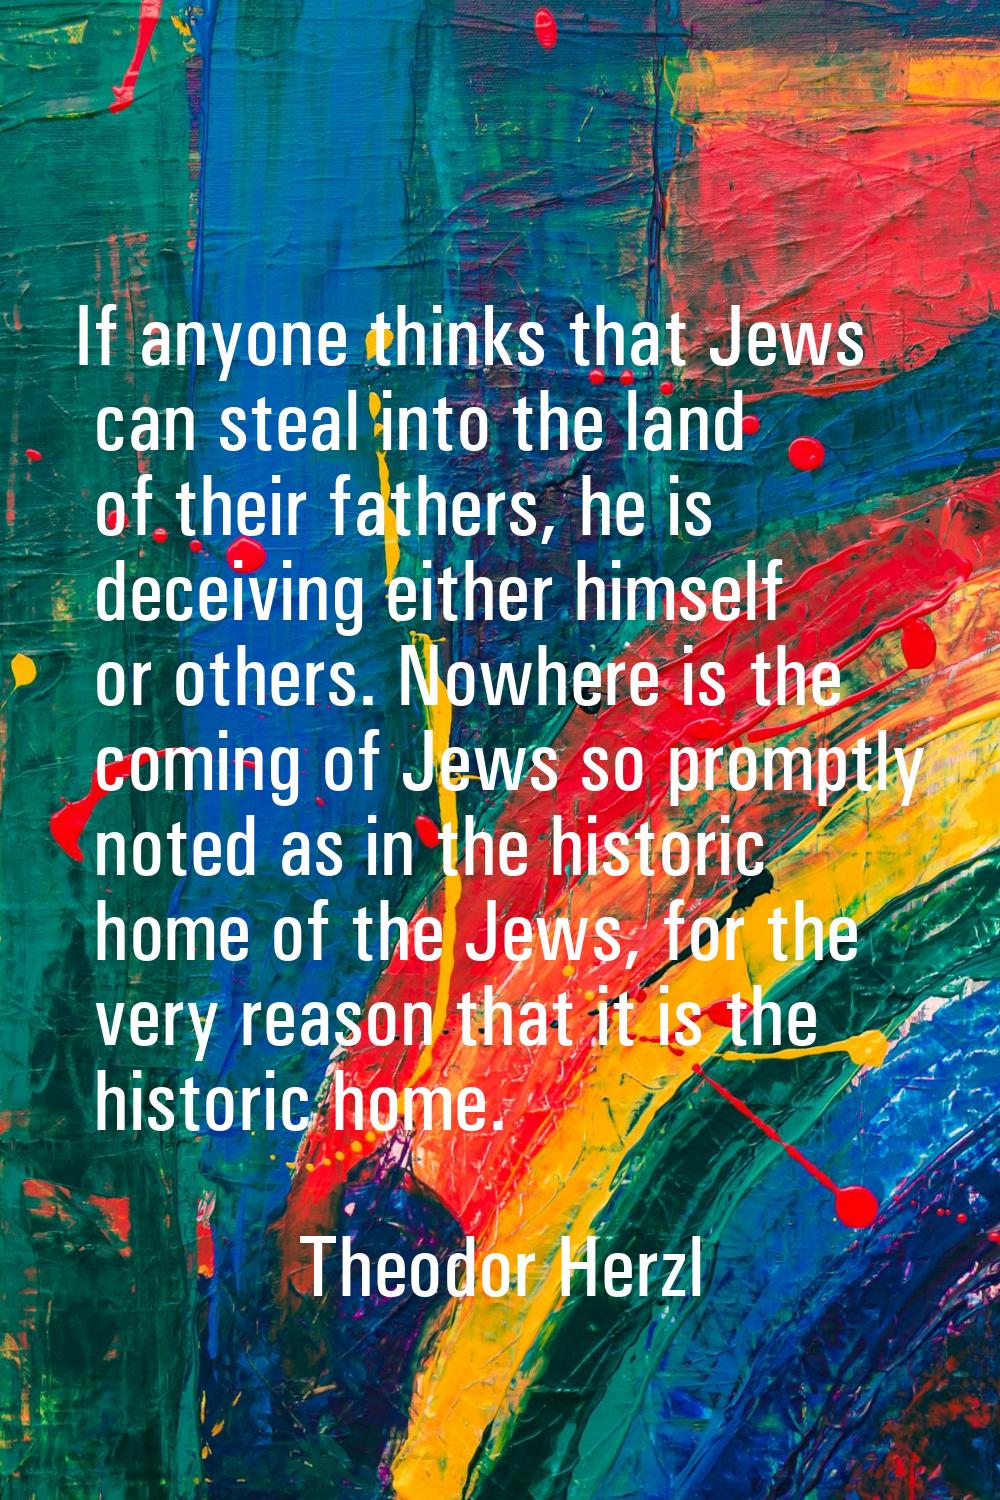 If anyone thinks that Jews can steal into the land of their fathers, he is deceiving either himself